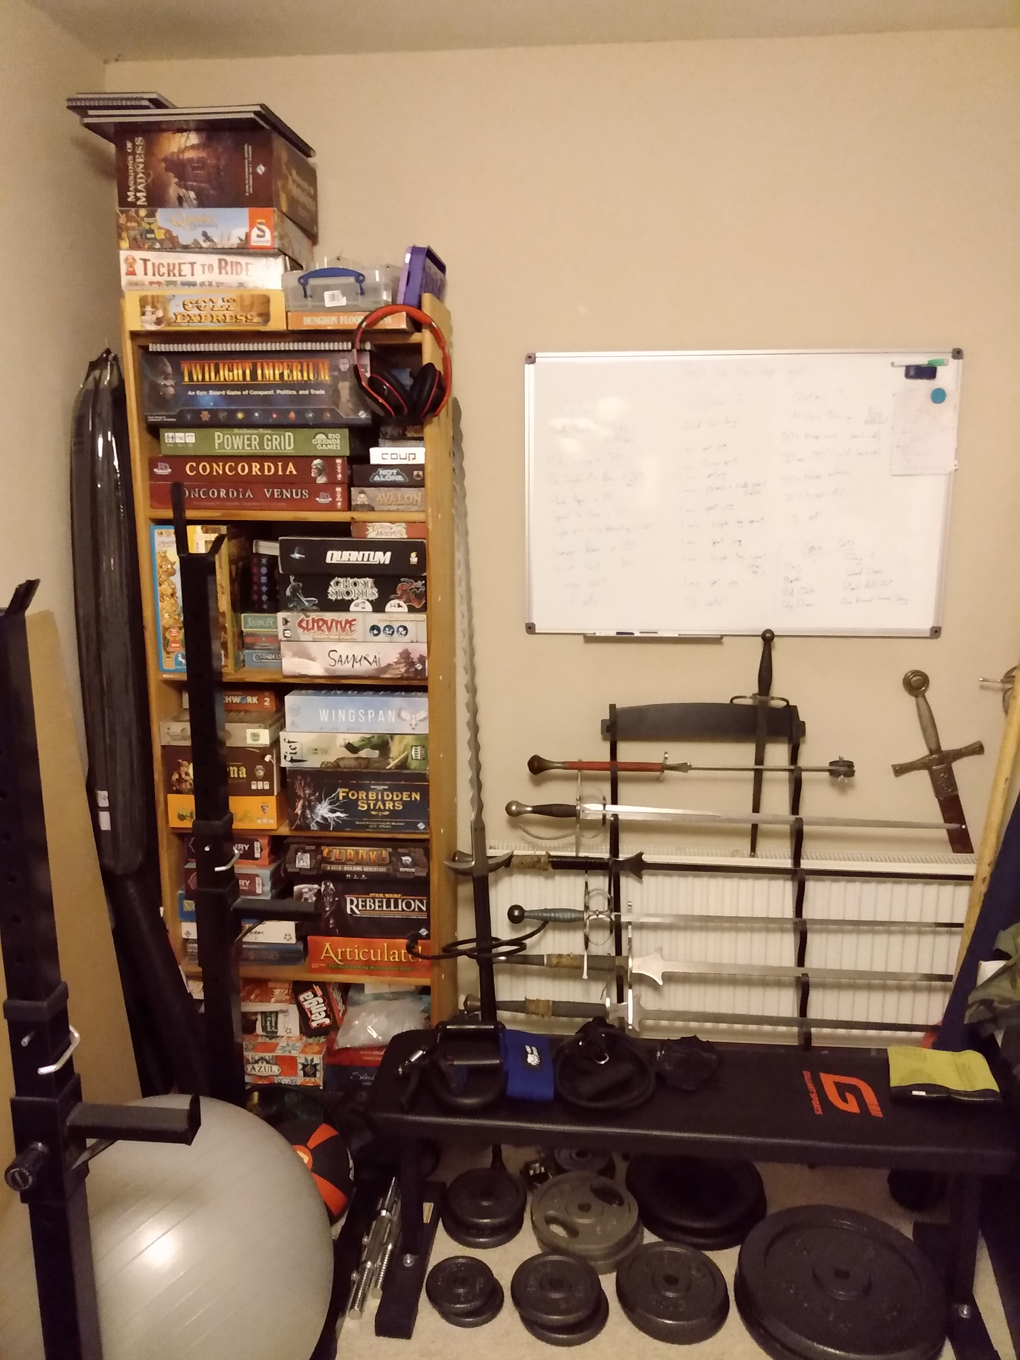 A bookshelf containing lots of boardgames next to an exercise bench, loose weights and a whiteboard